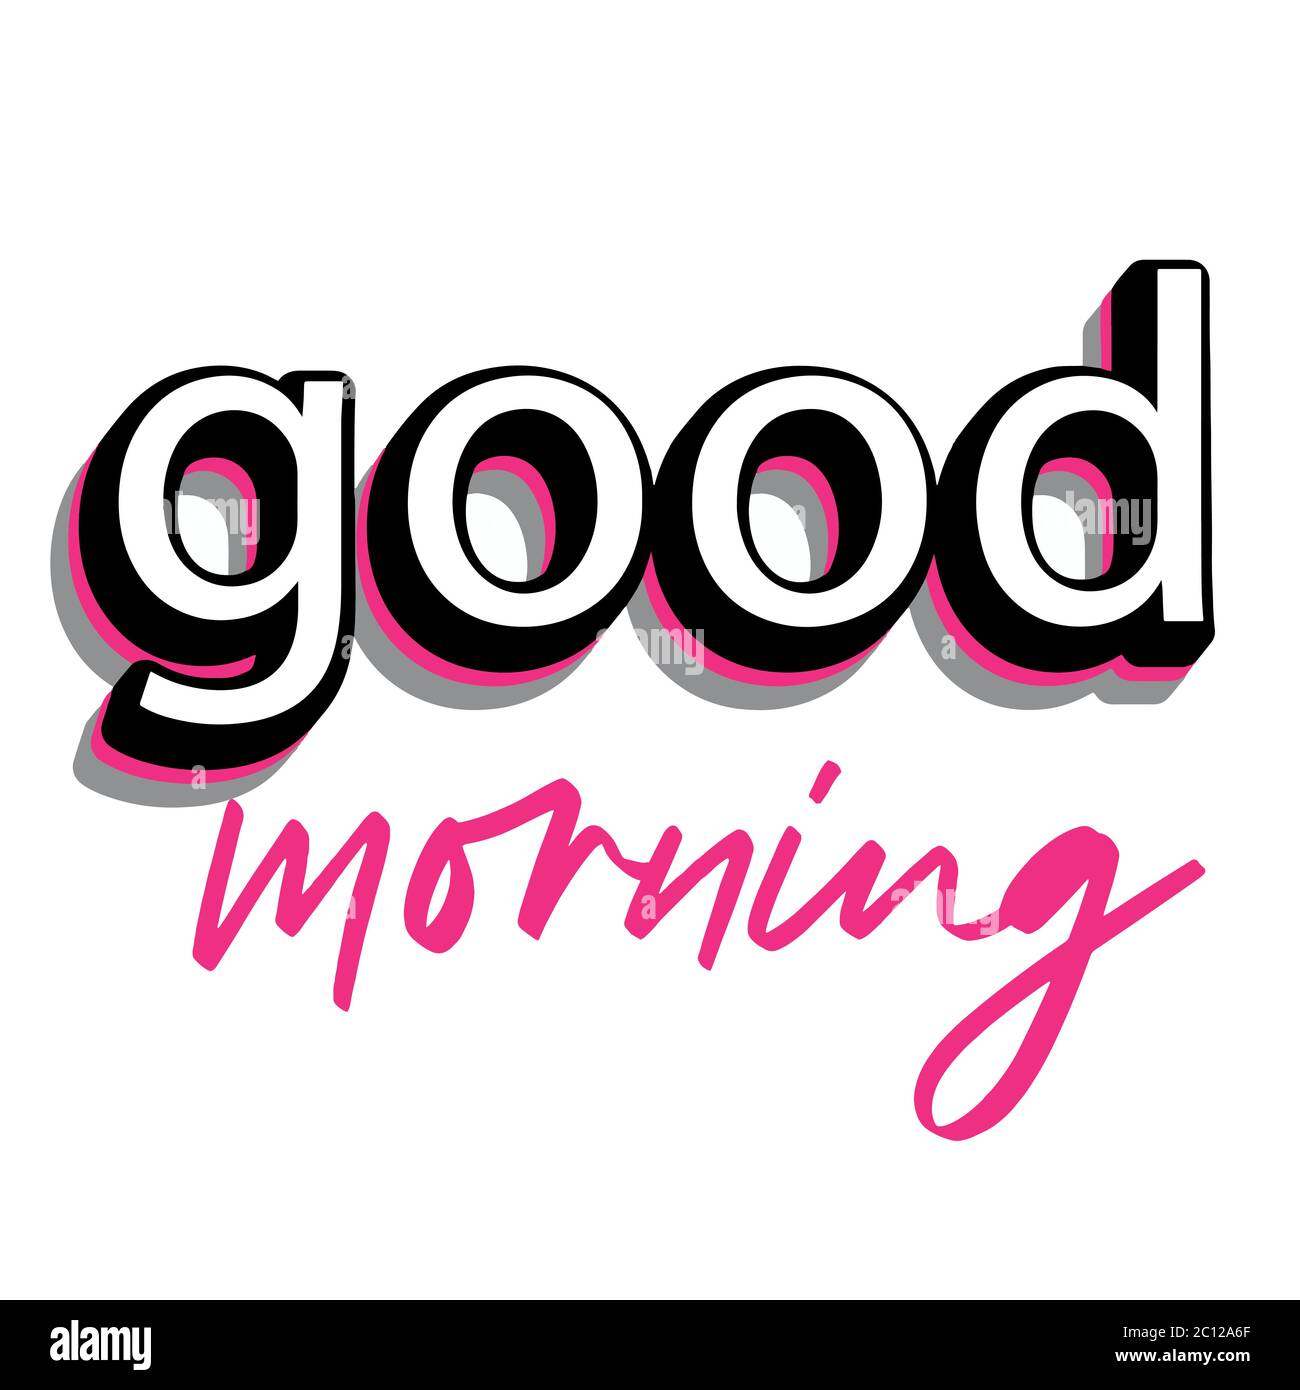 Good morning 3d quote simple positive message Stock Vector Image ...